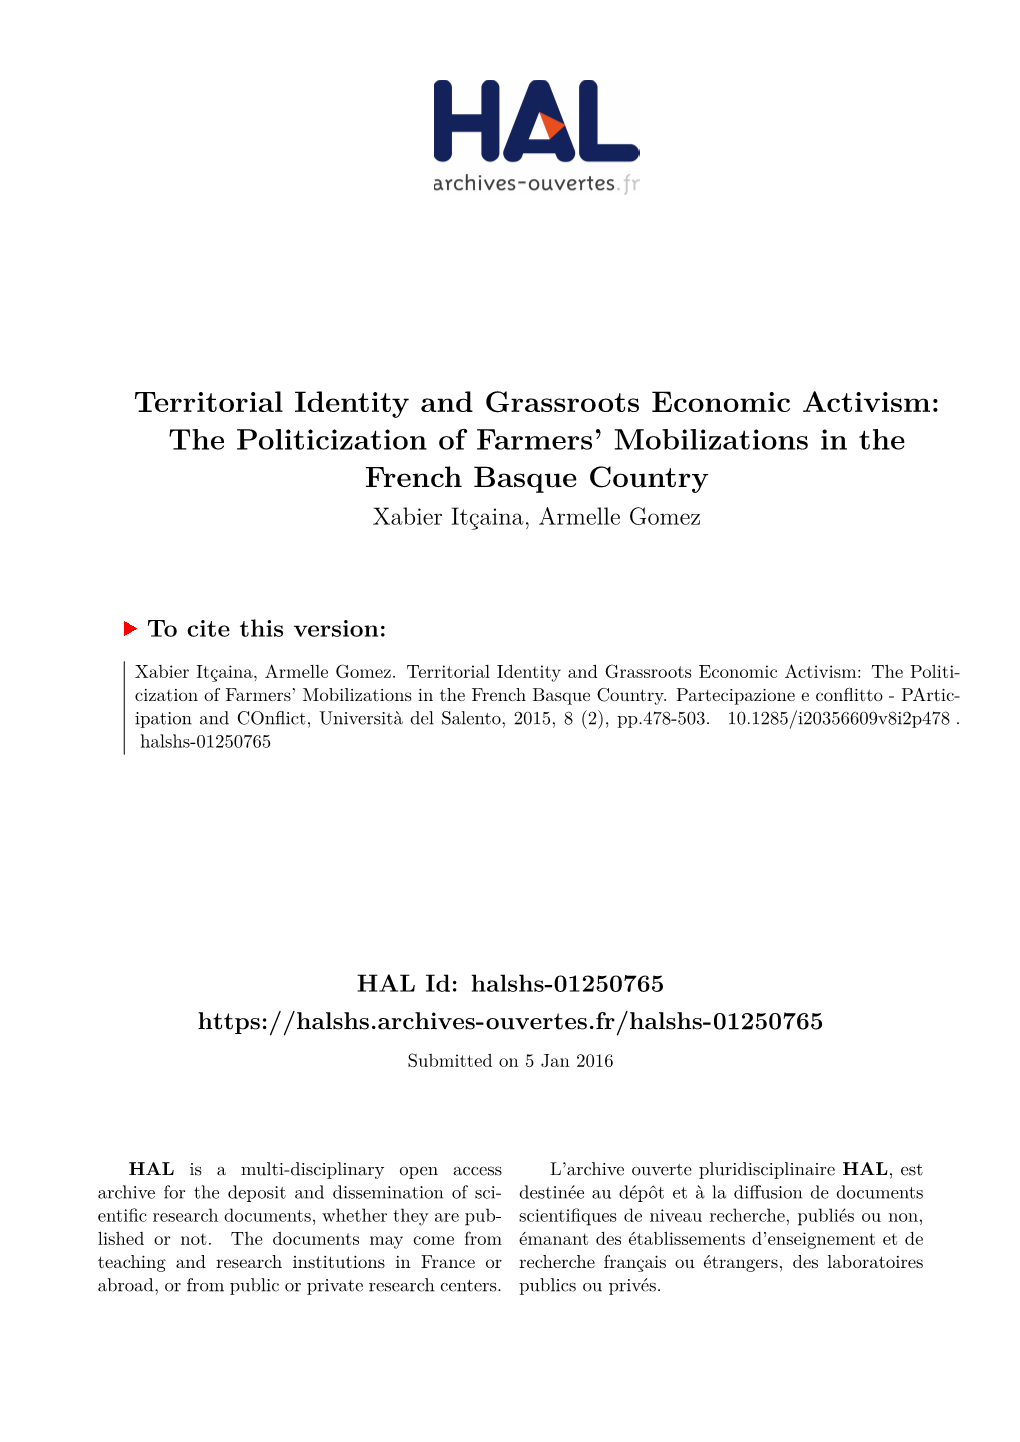 Territorial Identity and Grassroots Economic Activism: the Politicization of Farmers’ Mobilizations in the French Basque Country Xabier Itçaina, Armelle Gomez